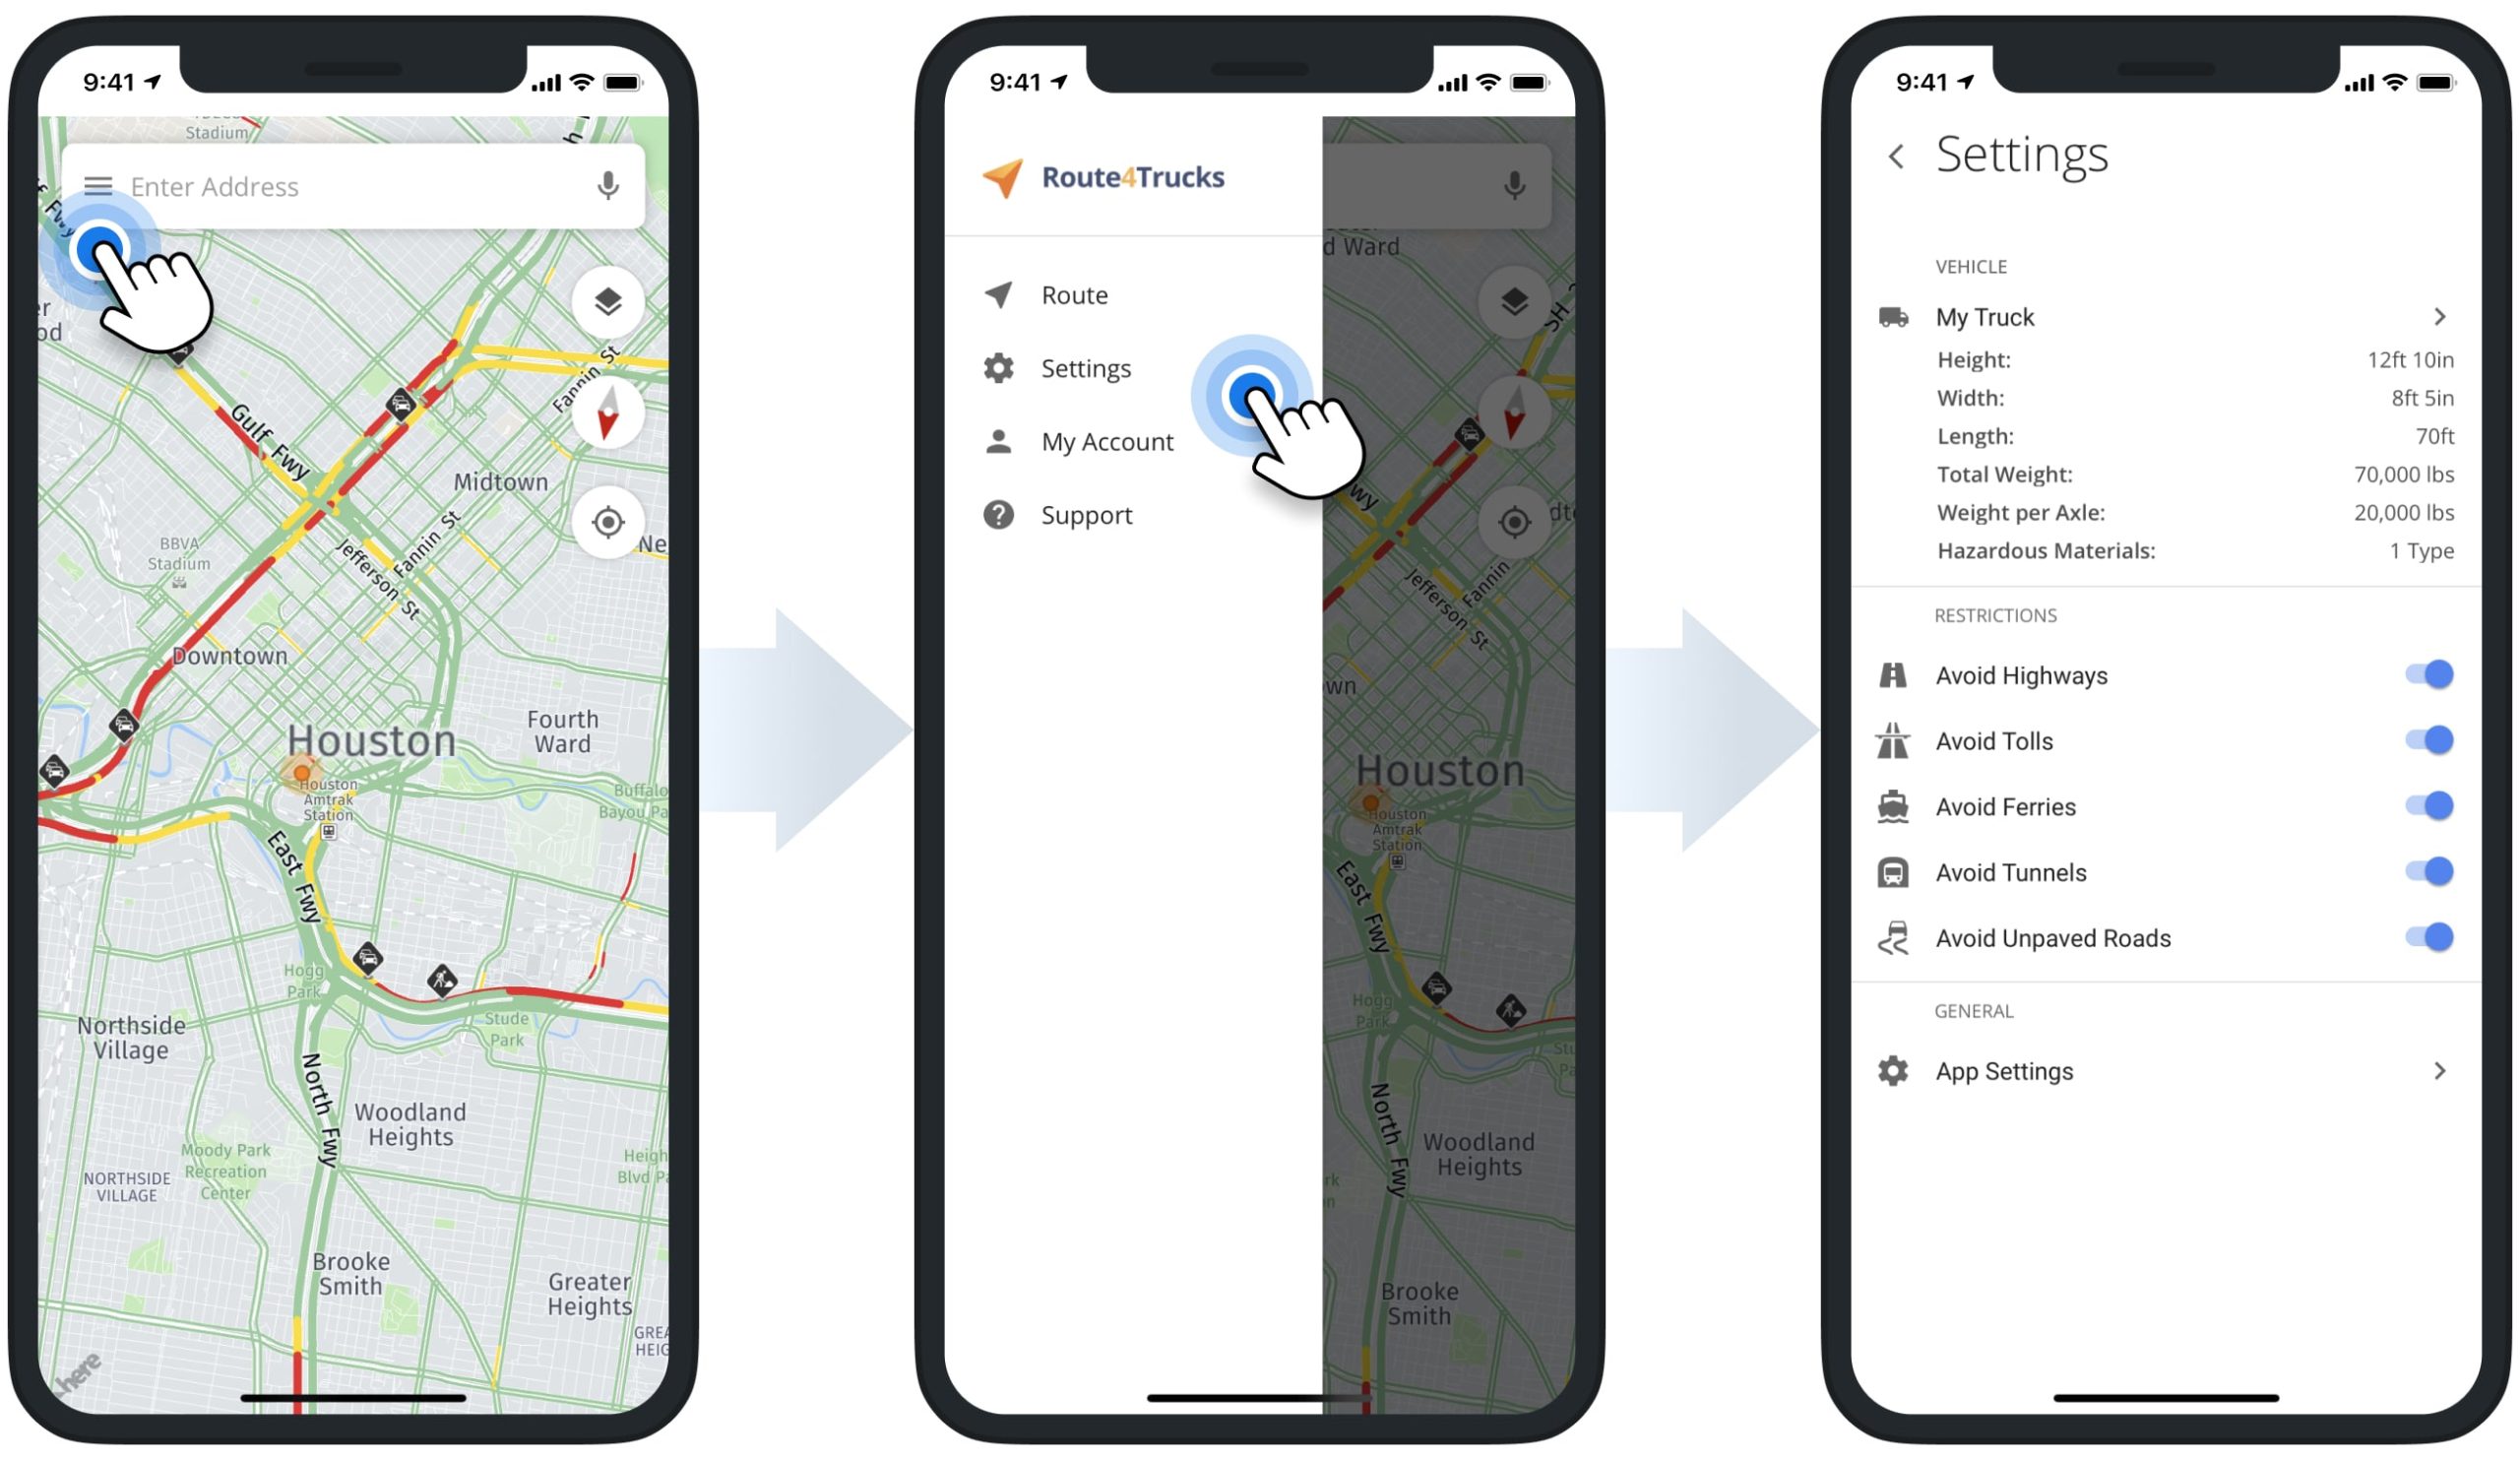 Route4Trucks app settings, commercial vehicle profiles, road restrictions, account, and subscription.